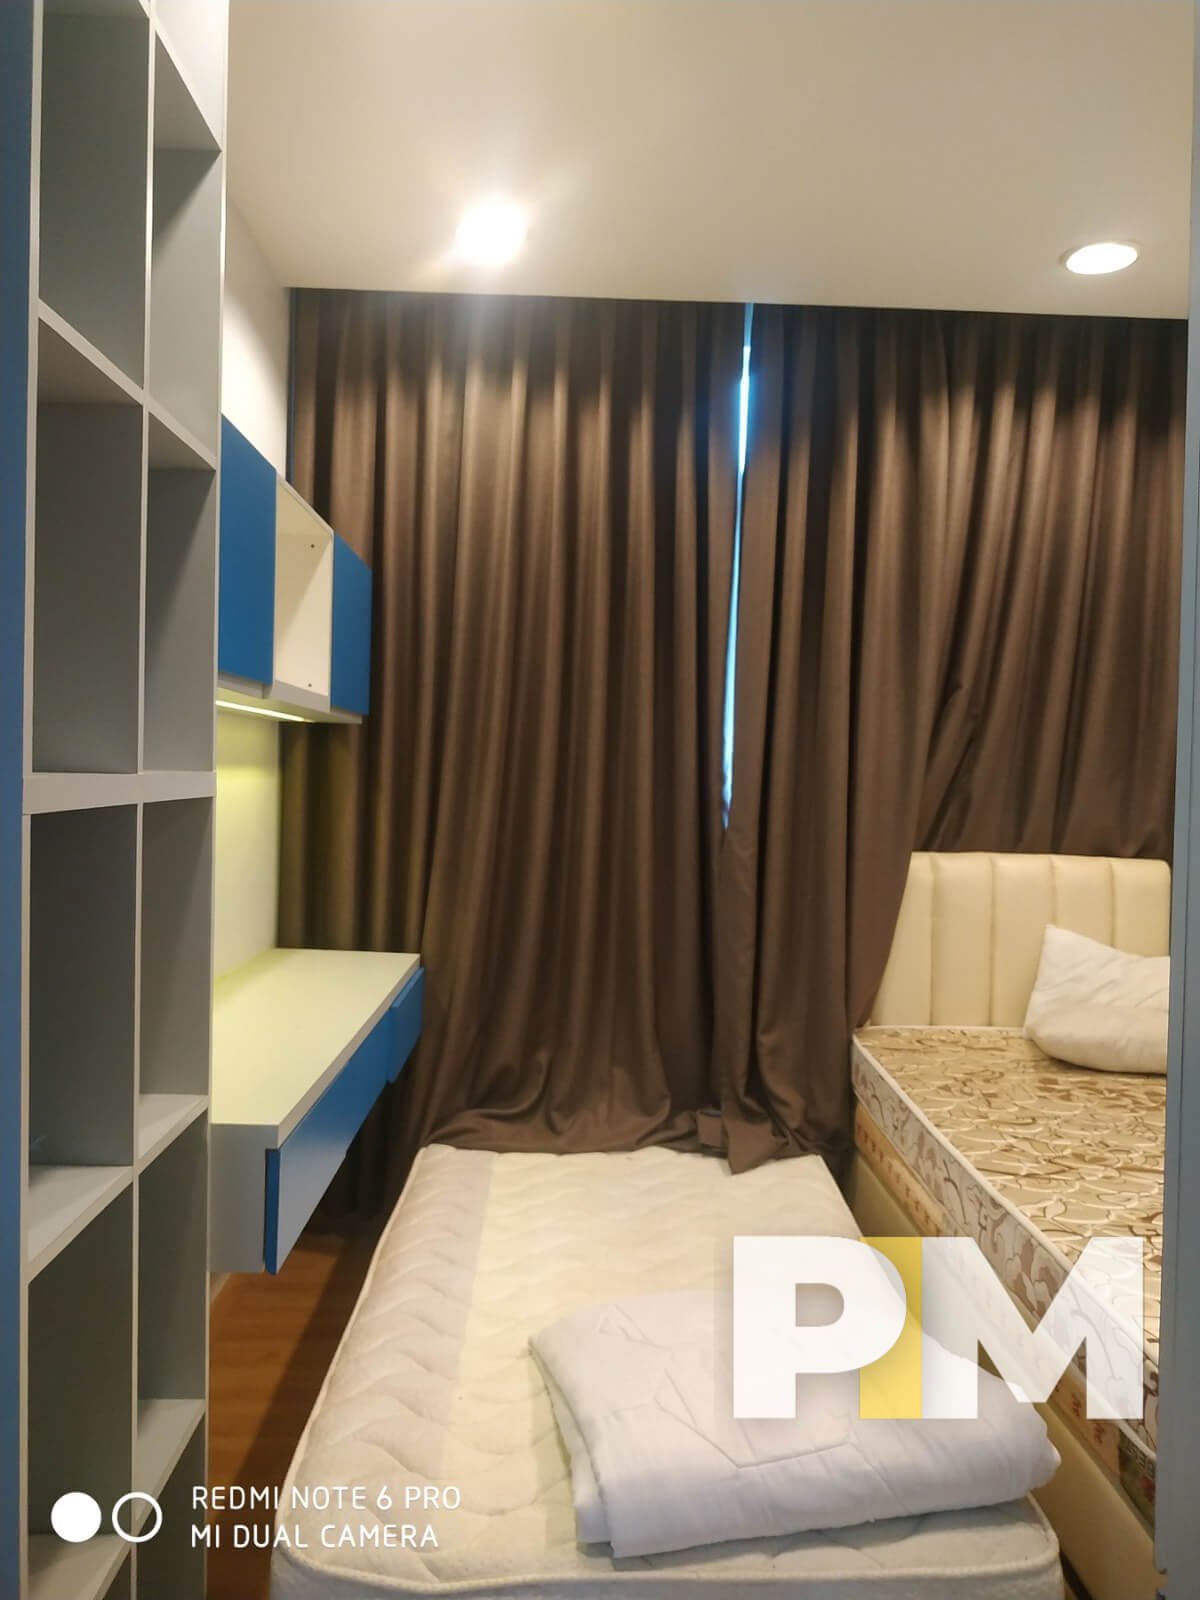 Bedroom with extra bed - Yangon Real Estate (2)